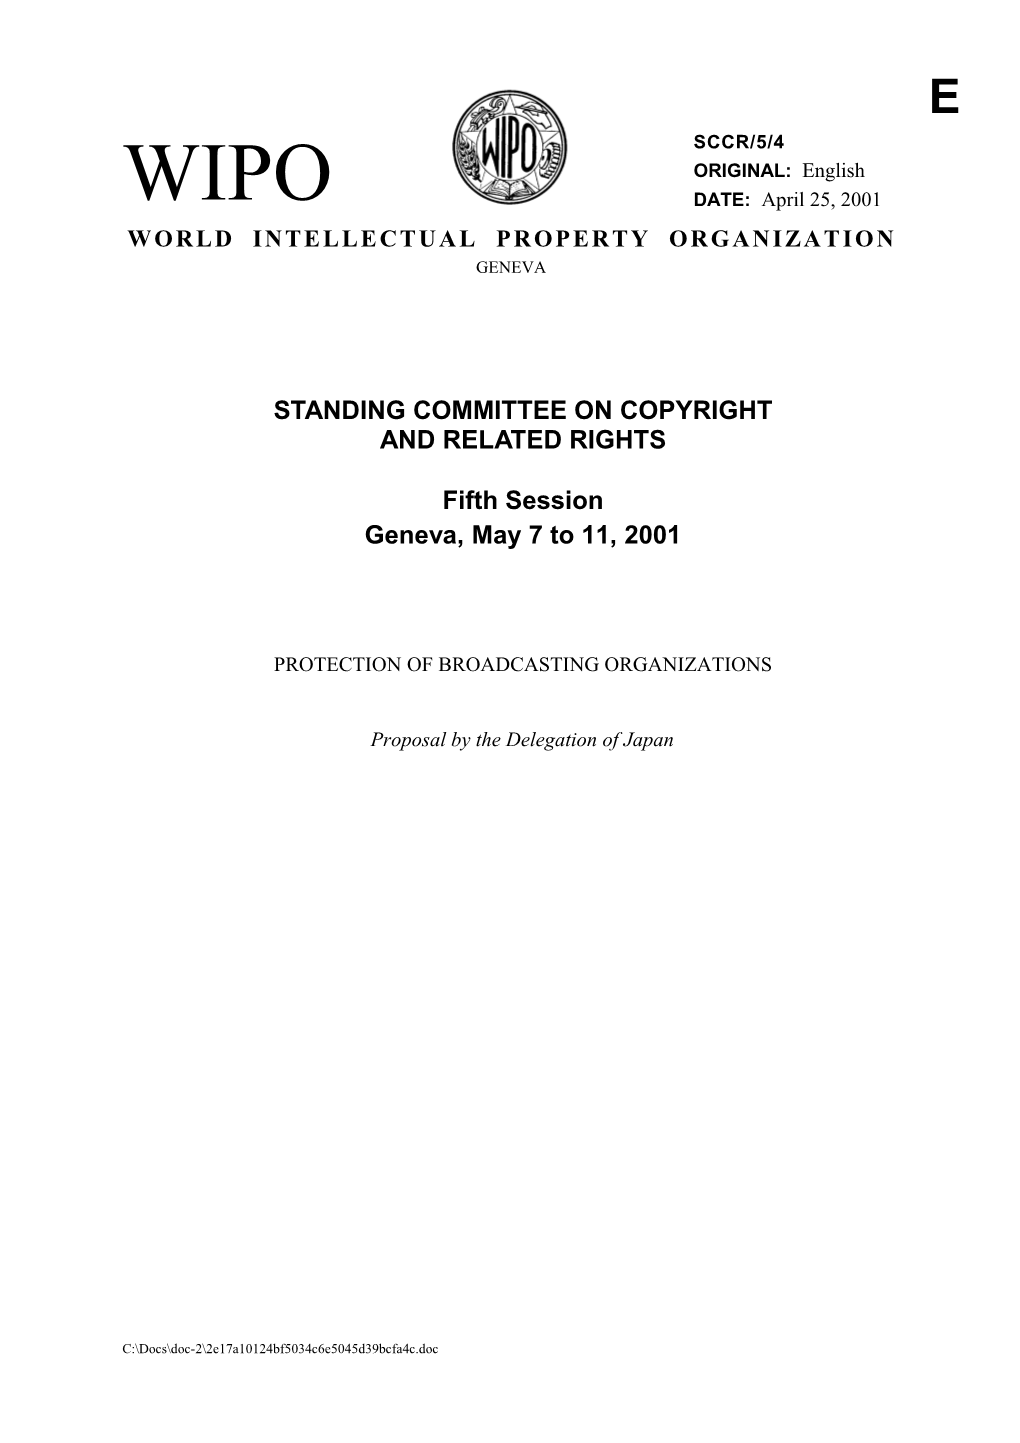 SCCR/5/4: Protection of Broadcasting Organizations (Proposal by the Delegation of Japan)